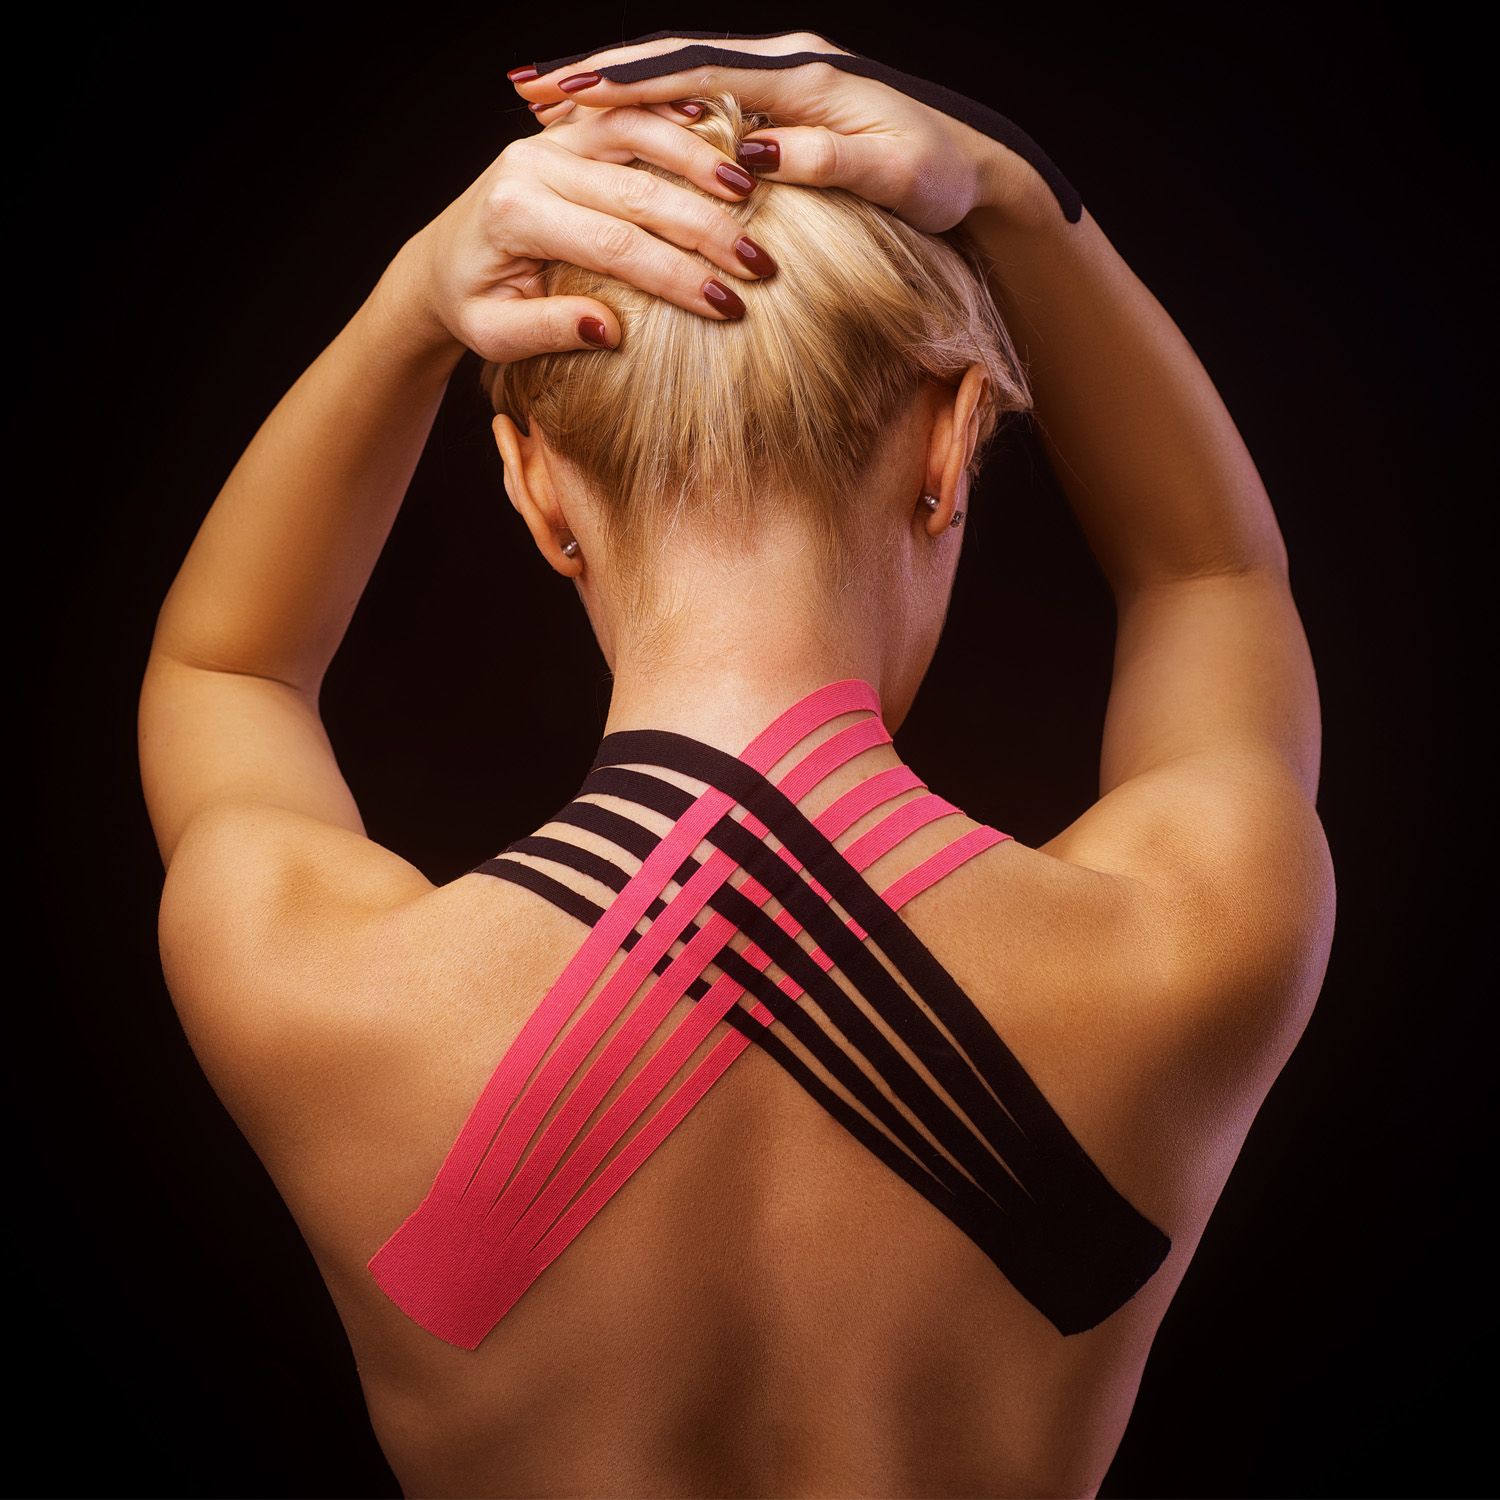 Kinesiology tape 6 rolls plus 2 rolls for free mood photo